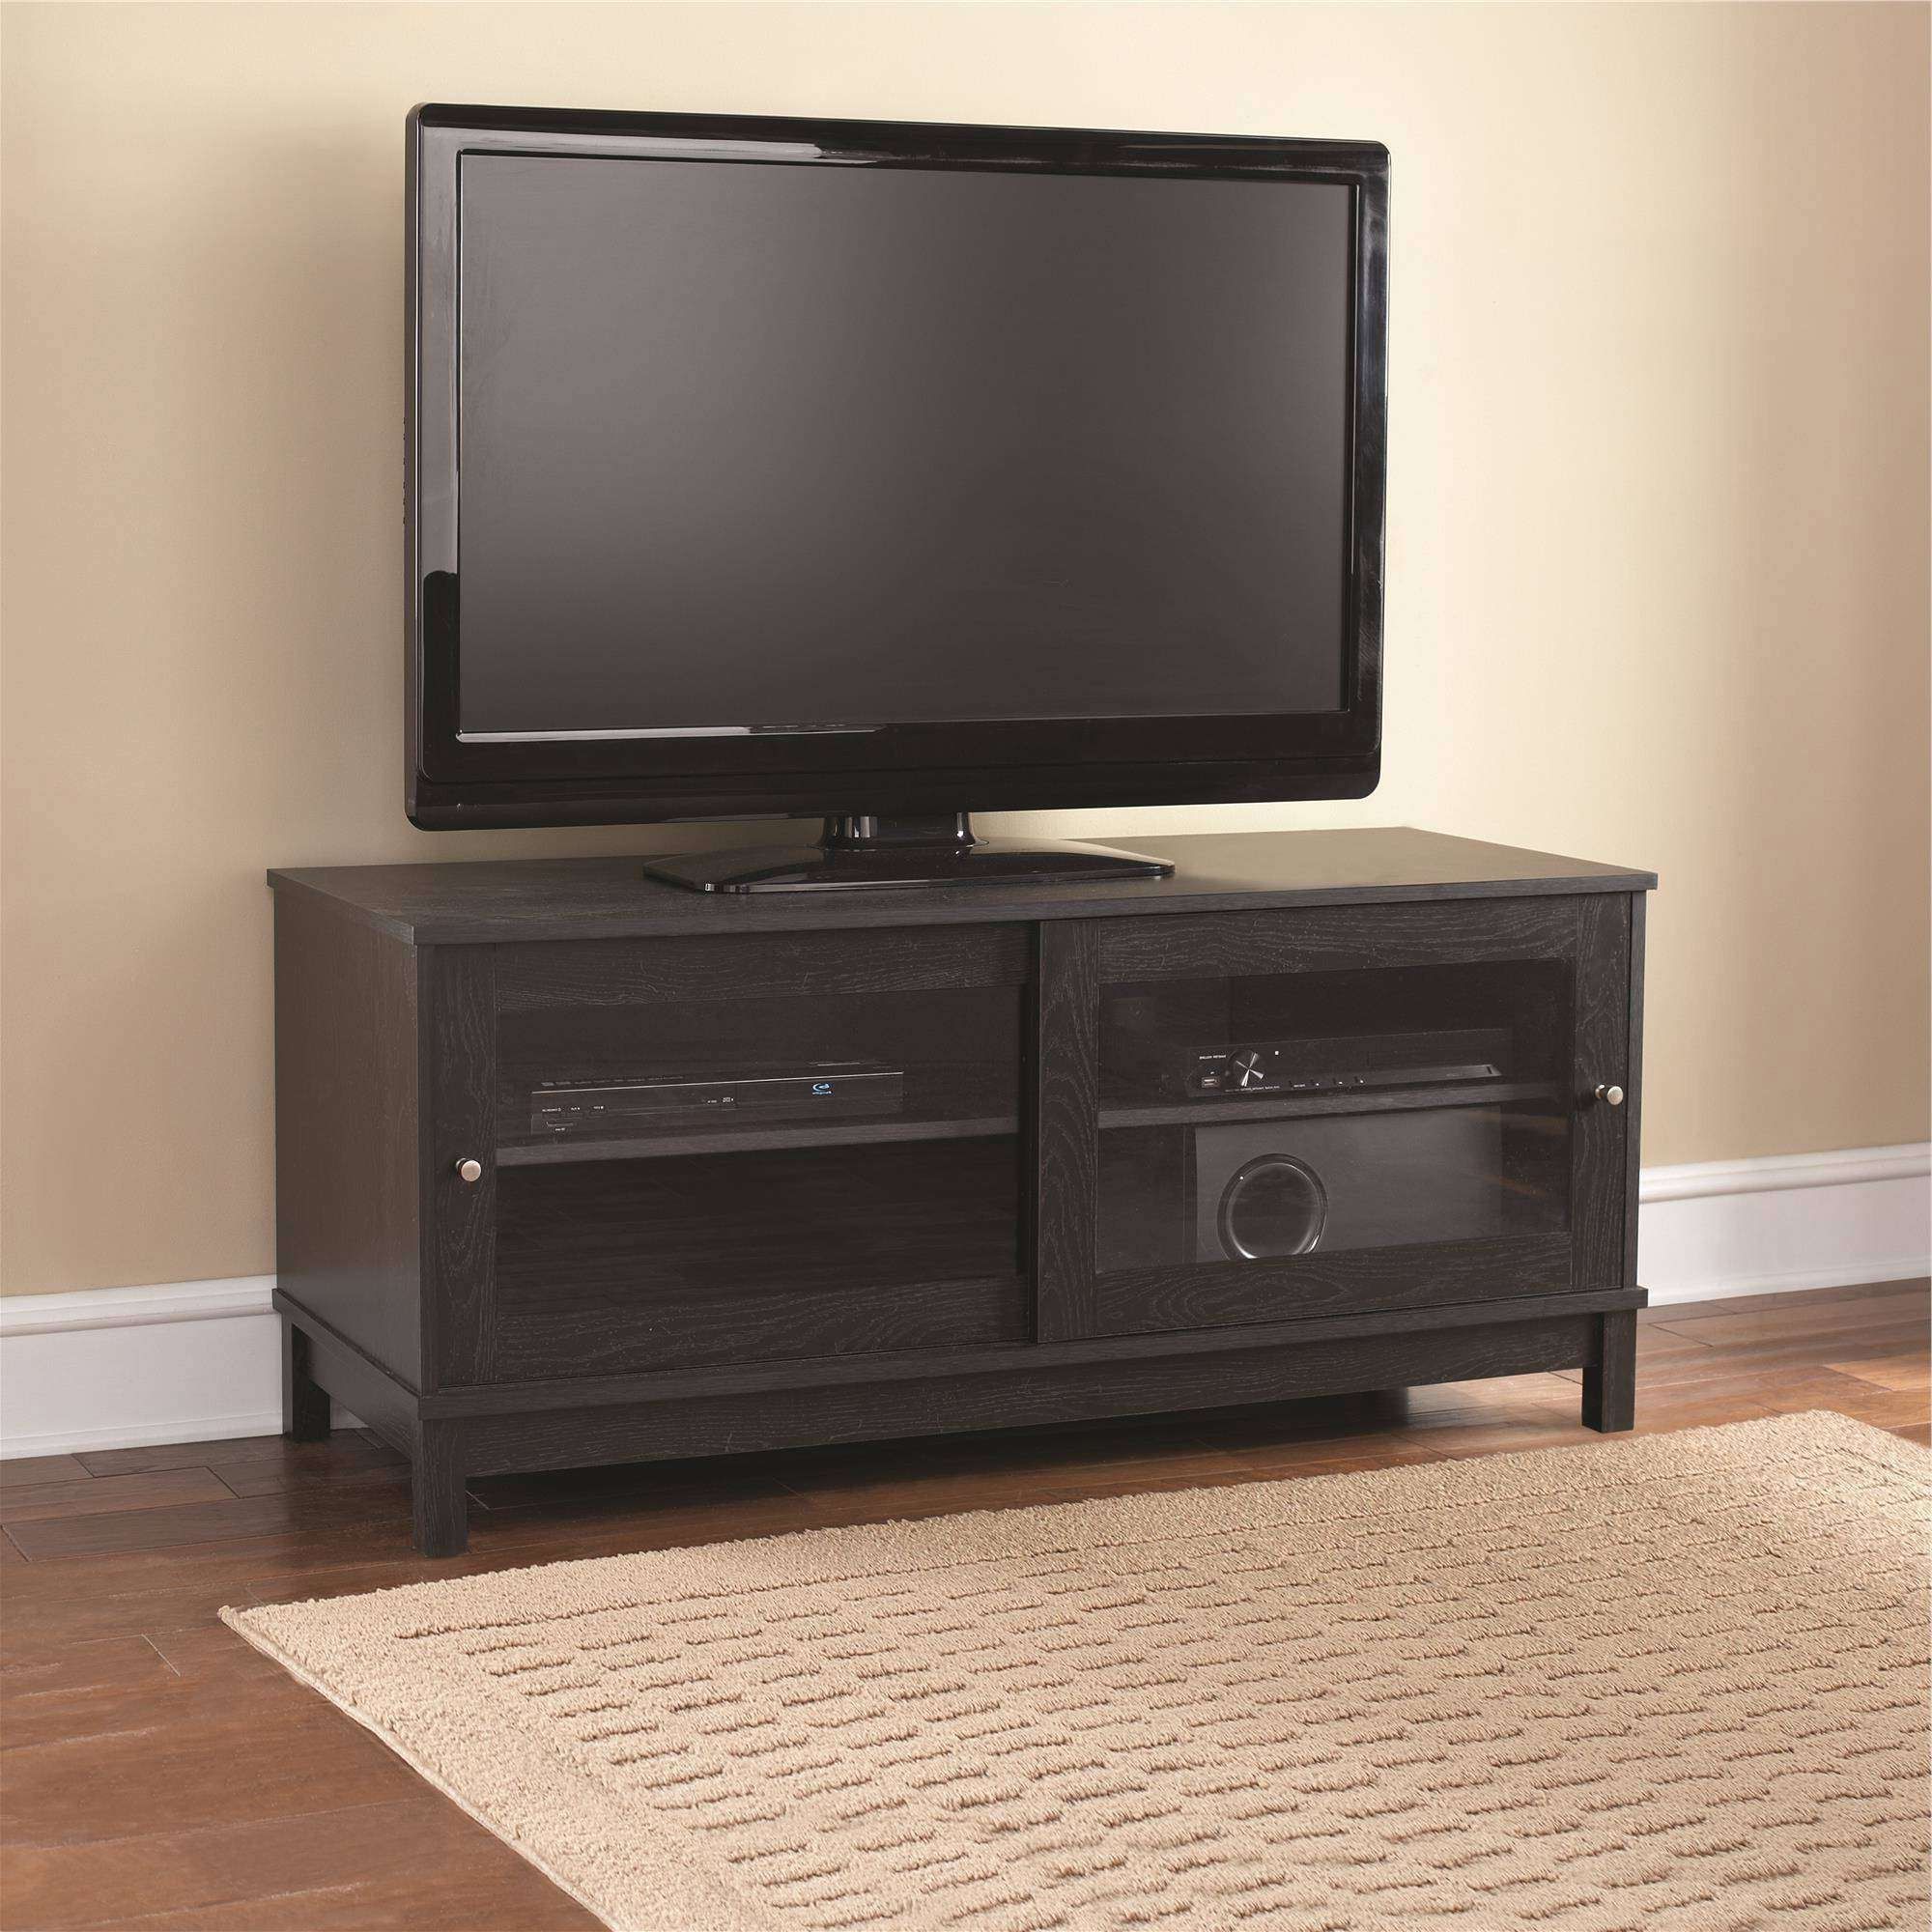 Mainstays 55" Tv Stand With Sliding Glass Doors, Black Ebony Ash With Regard To Tv Stands For 55 Inch Tv (View 1 of 15)